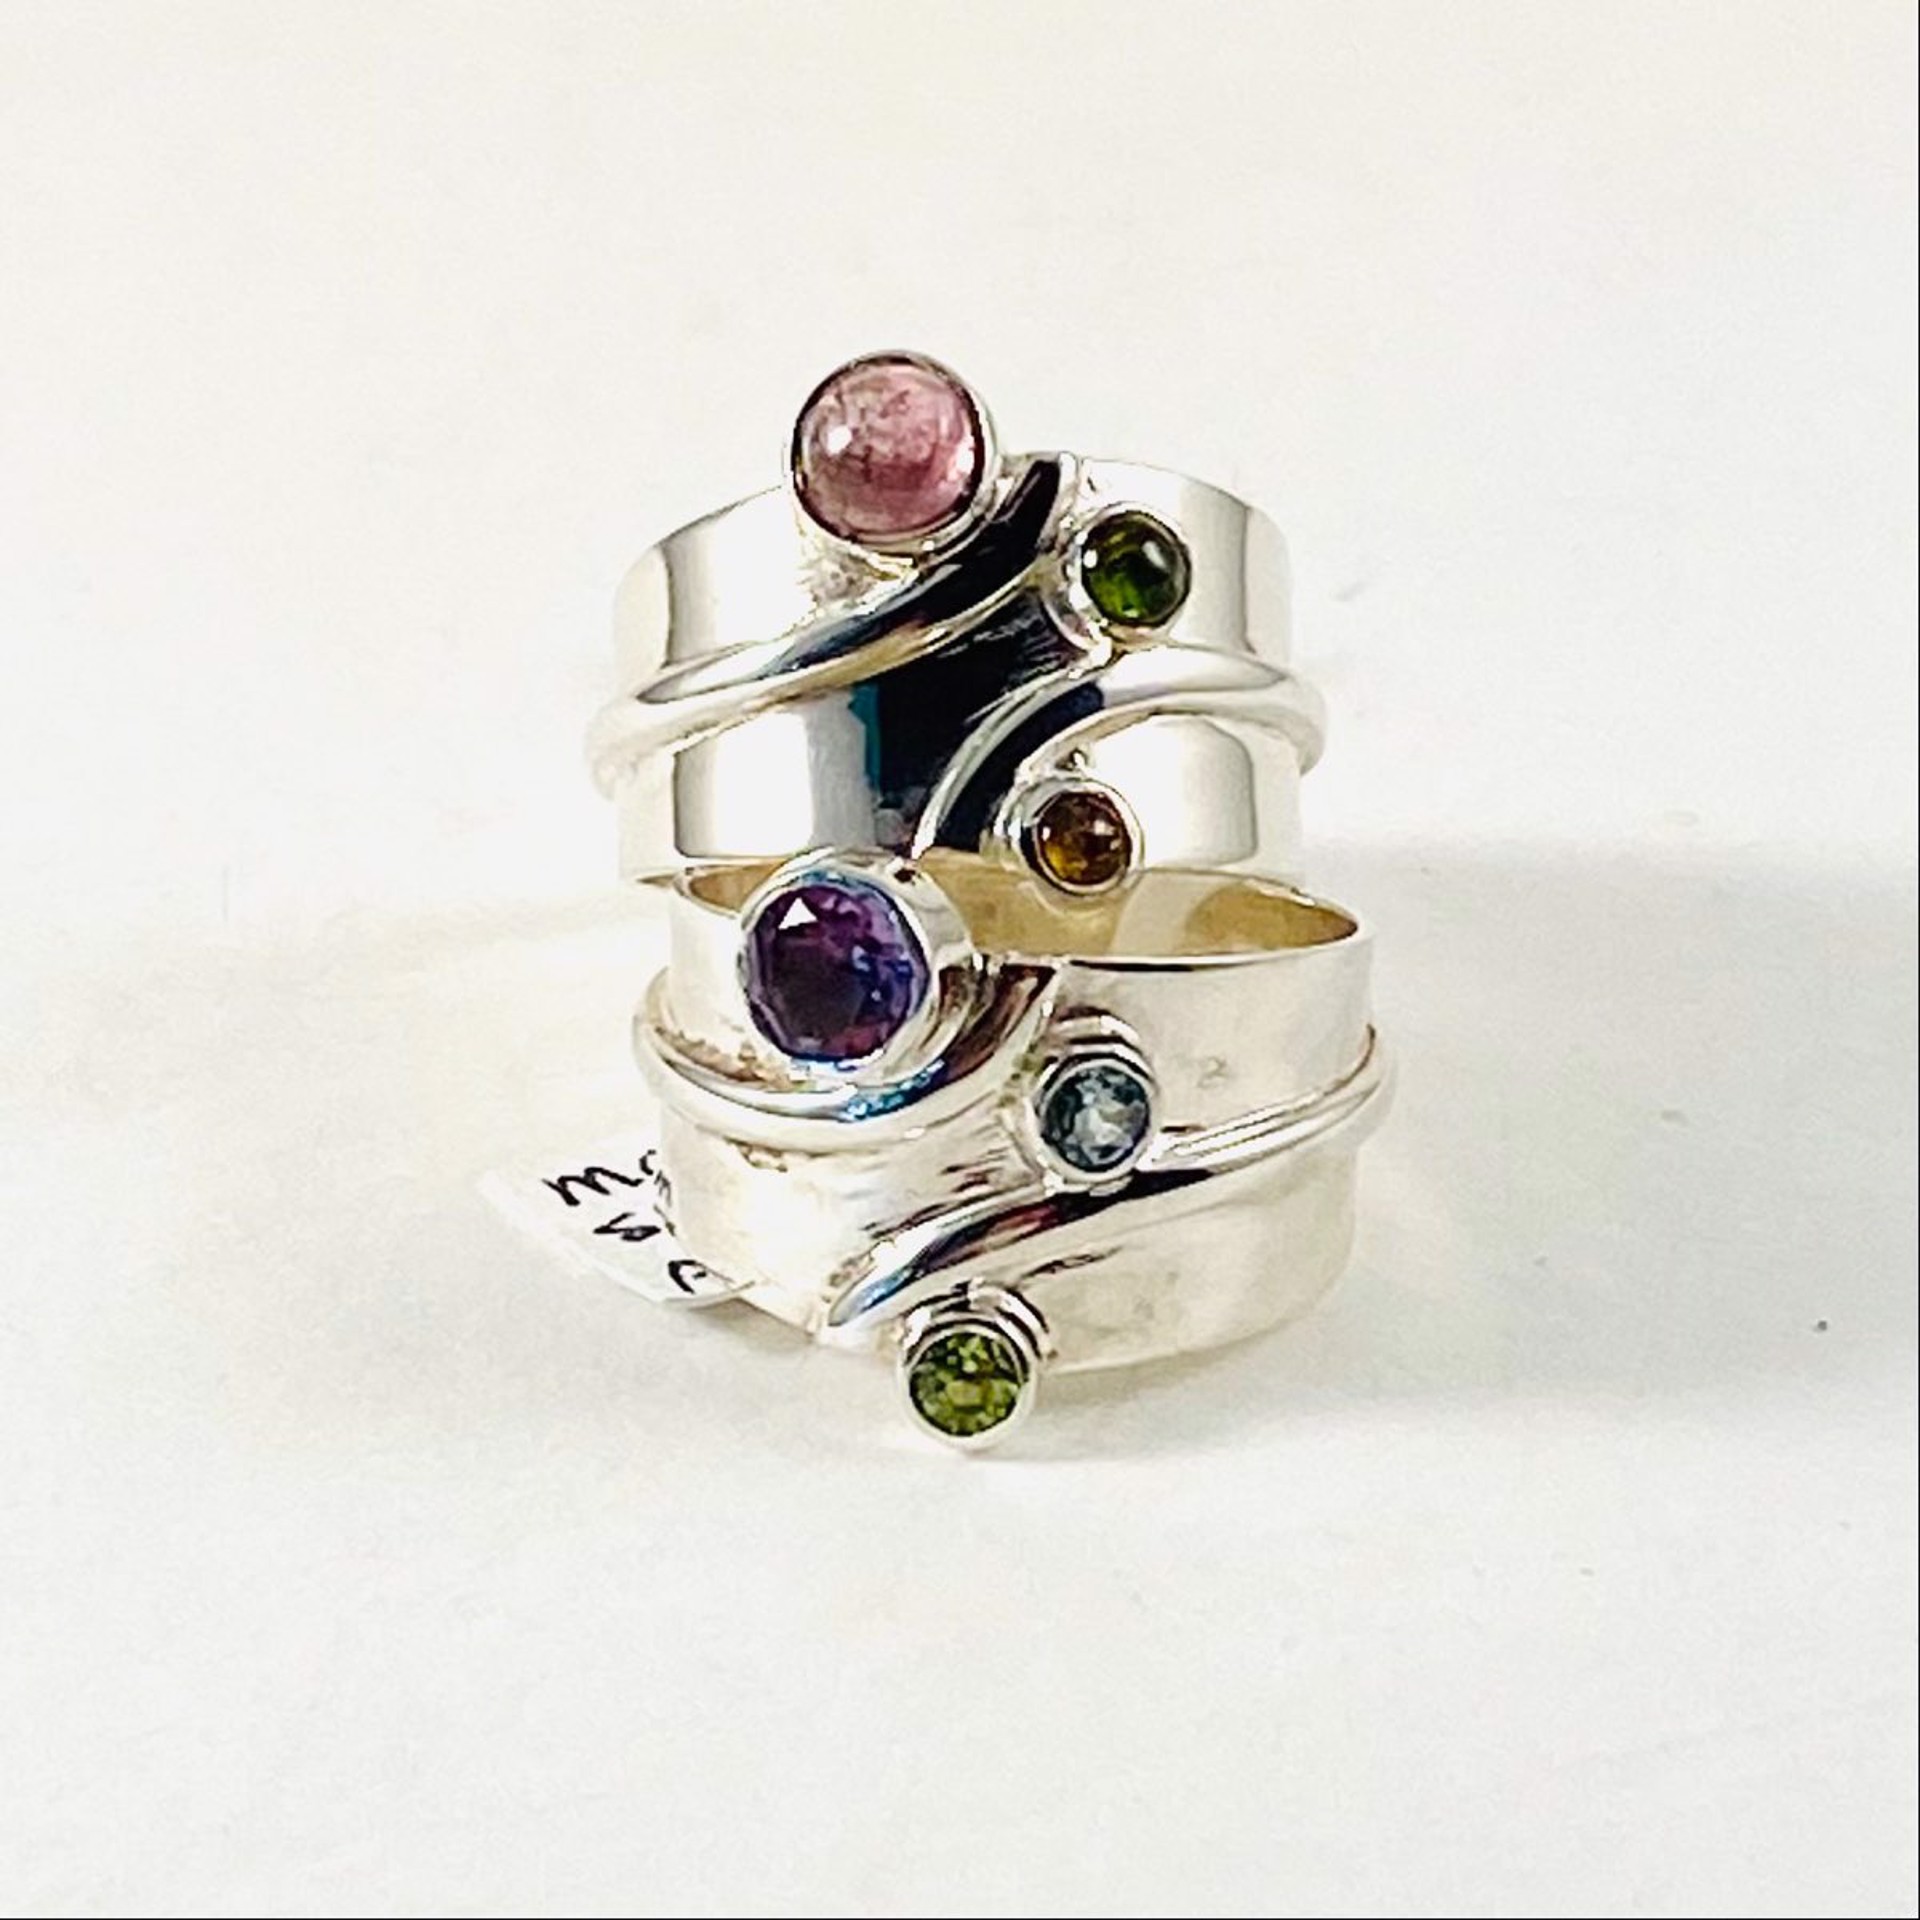 MON SR 3188 Cabochon Tourmaline ($88) or Faceted Multi Gemstone ($82) by Monica Mehta